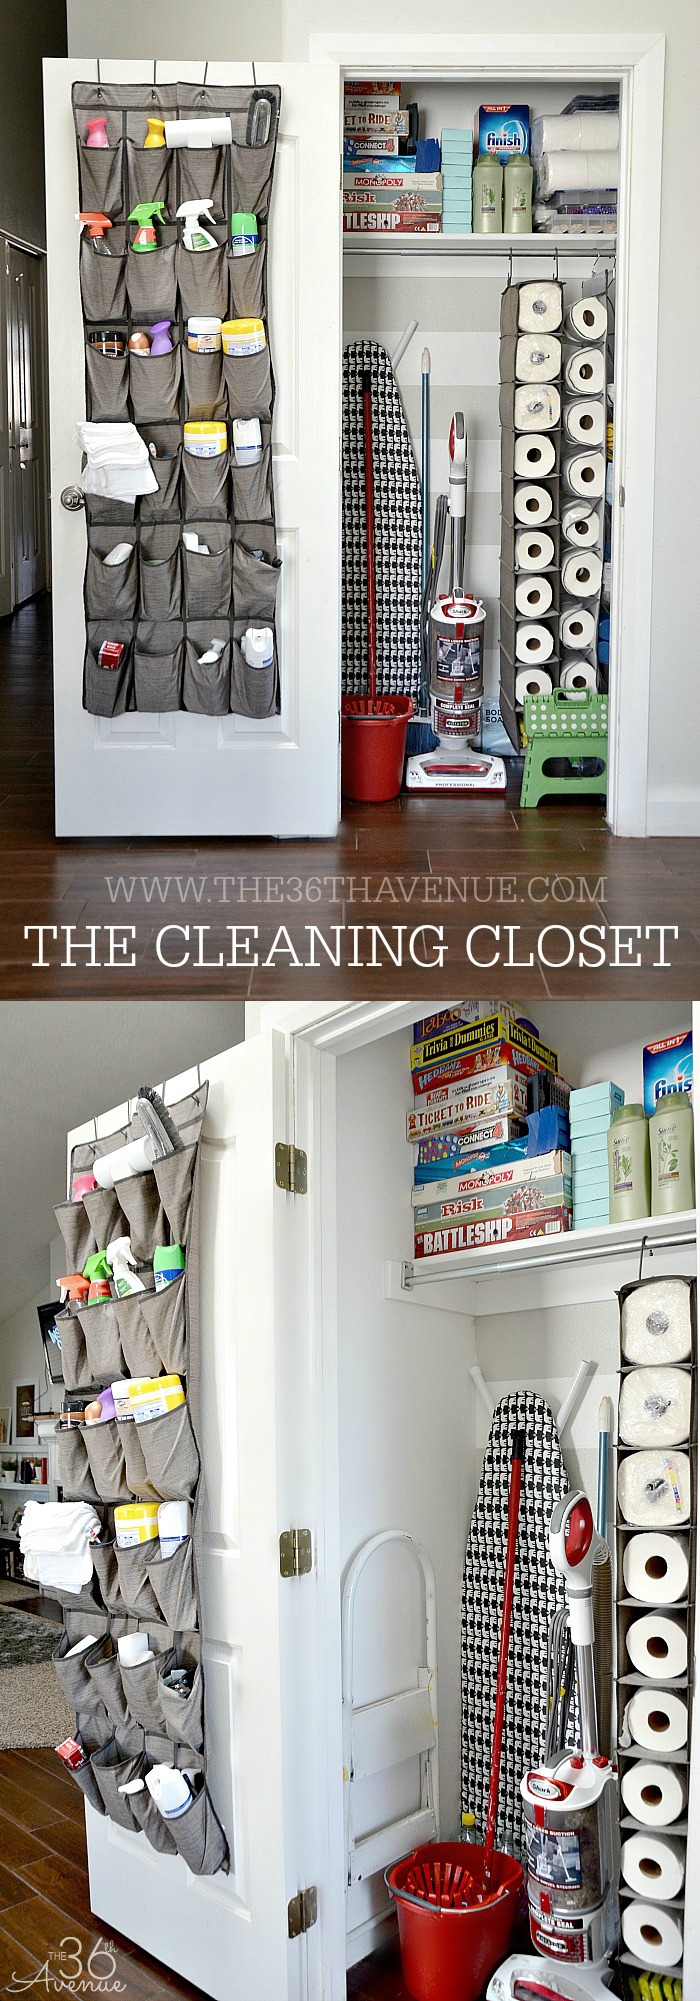 Shoebags are a great way to add organization to the home